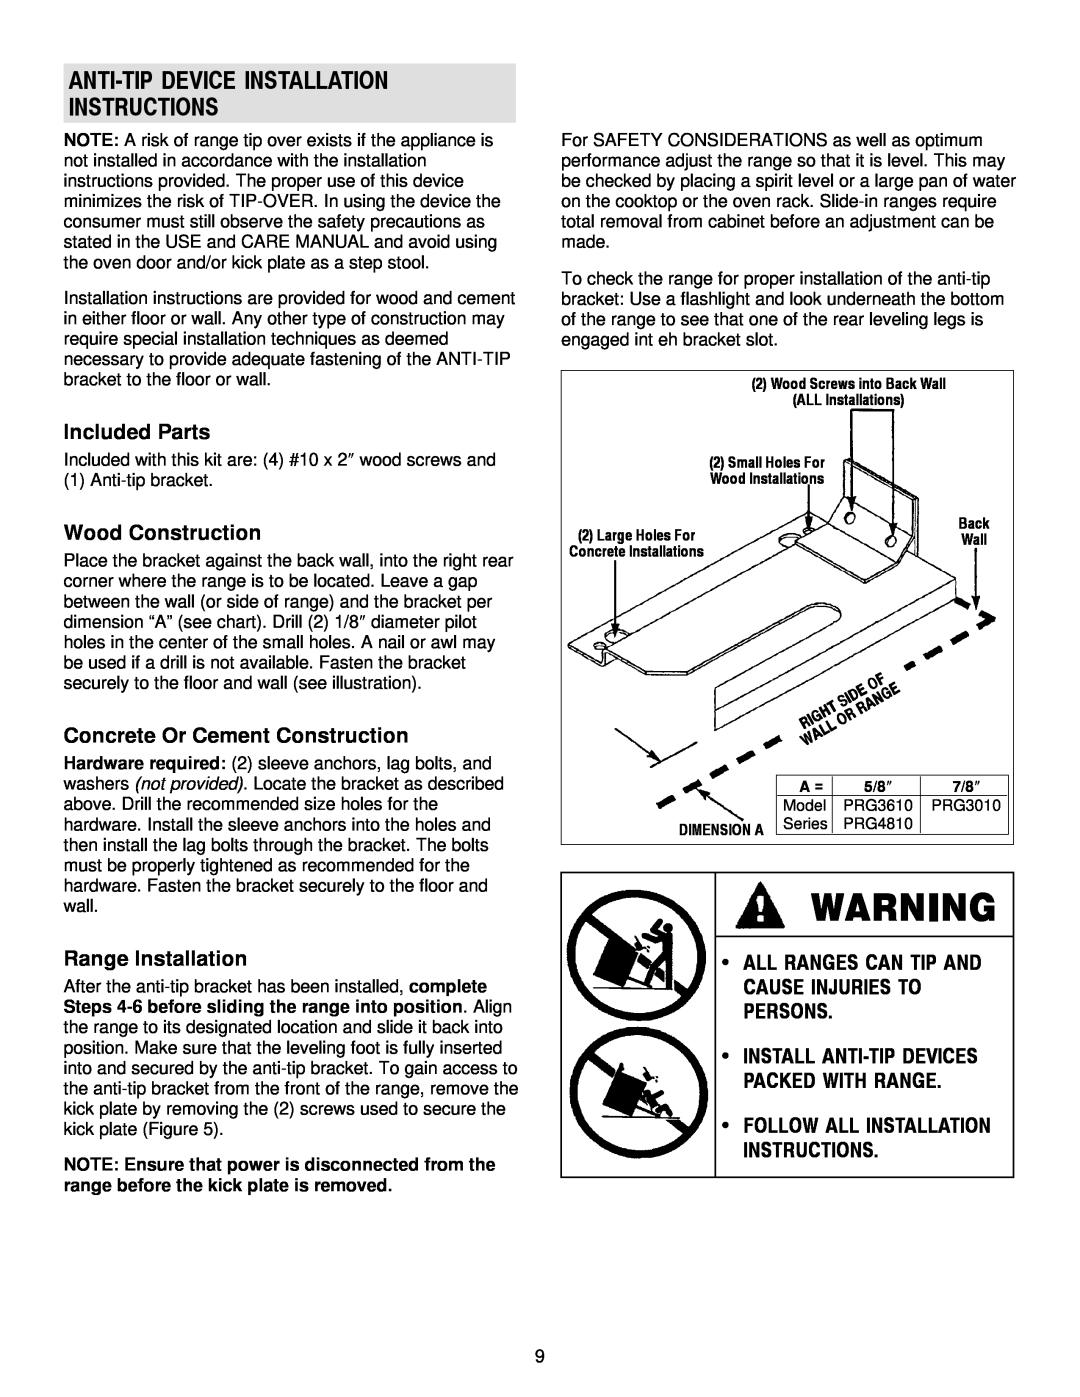 Jenn-Air 30 Anti-Tipdevice Installation Instructions, Included Parts, Wood Construction, Concrete Or Cement Construction 